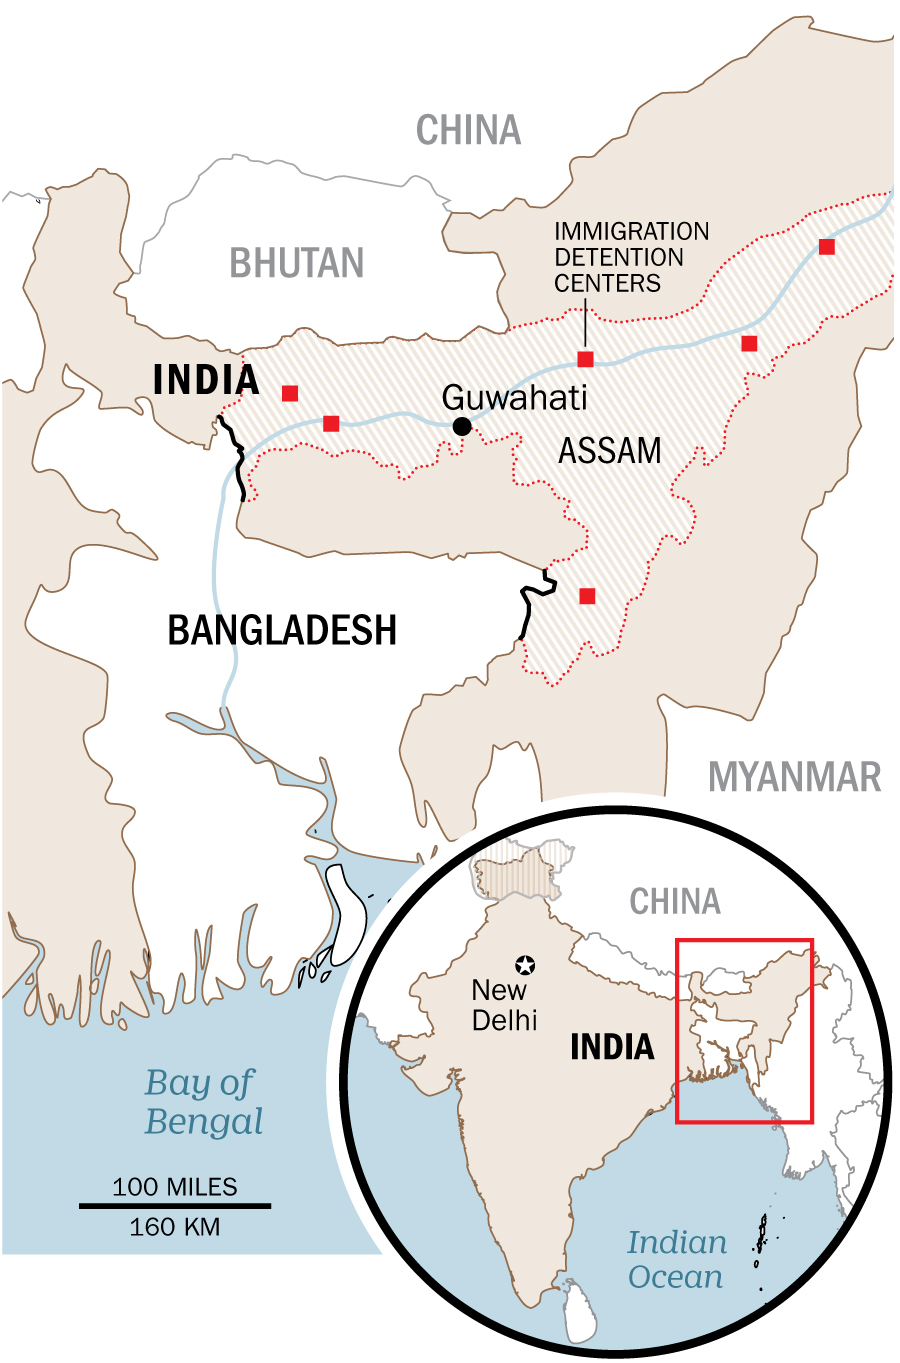 Currently, there are six detention centers for people who are found to be noncitizens in Assam. They have a combined capacity of 3,300 people (Lon Tweeten—TIME)